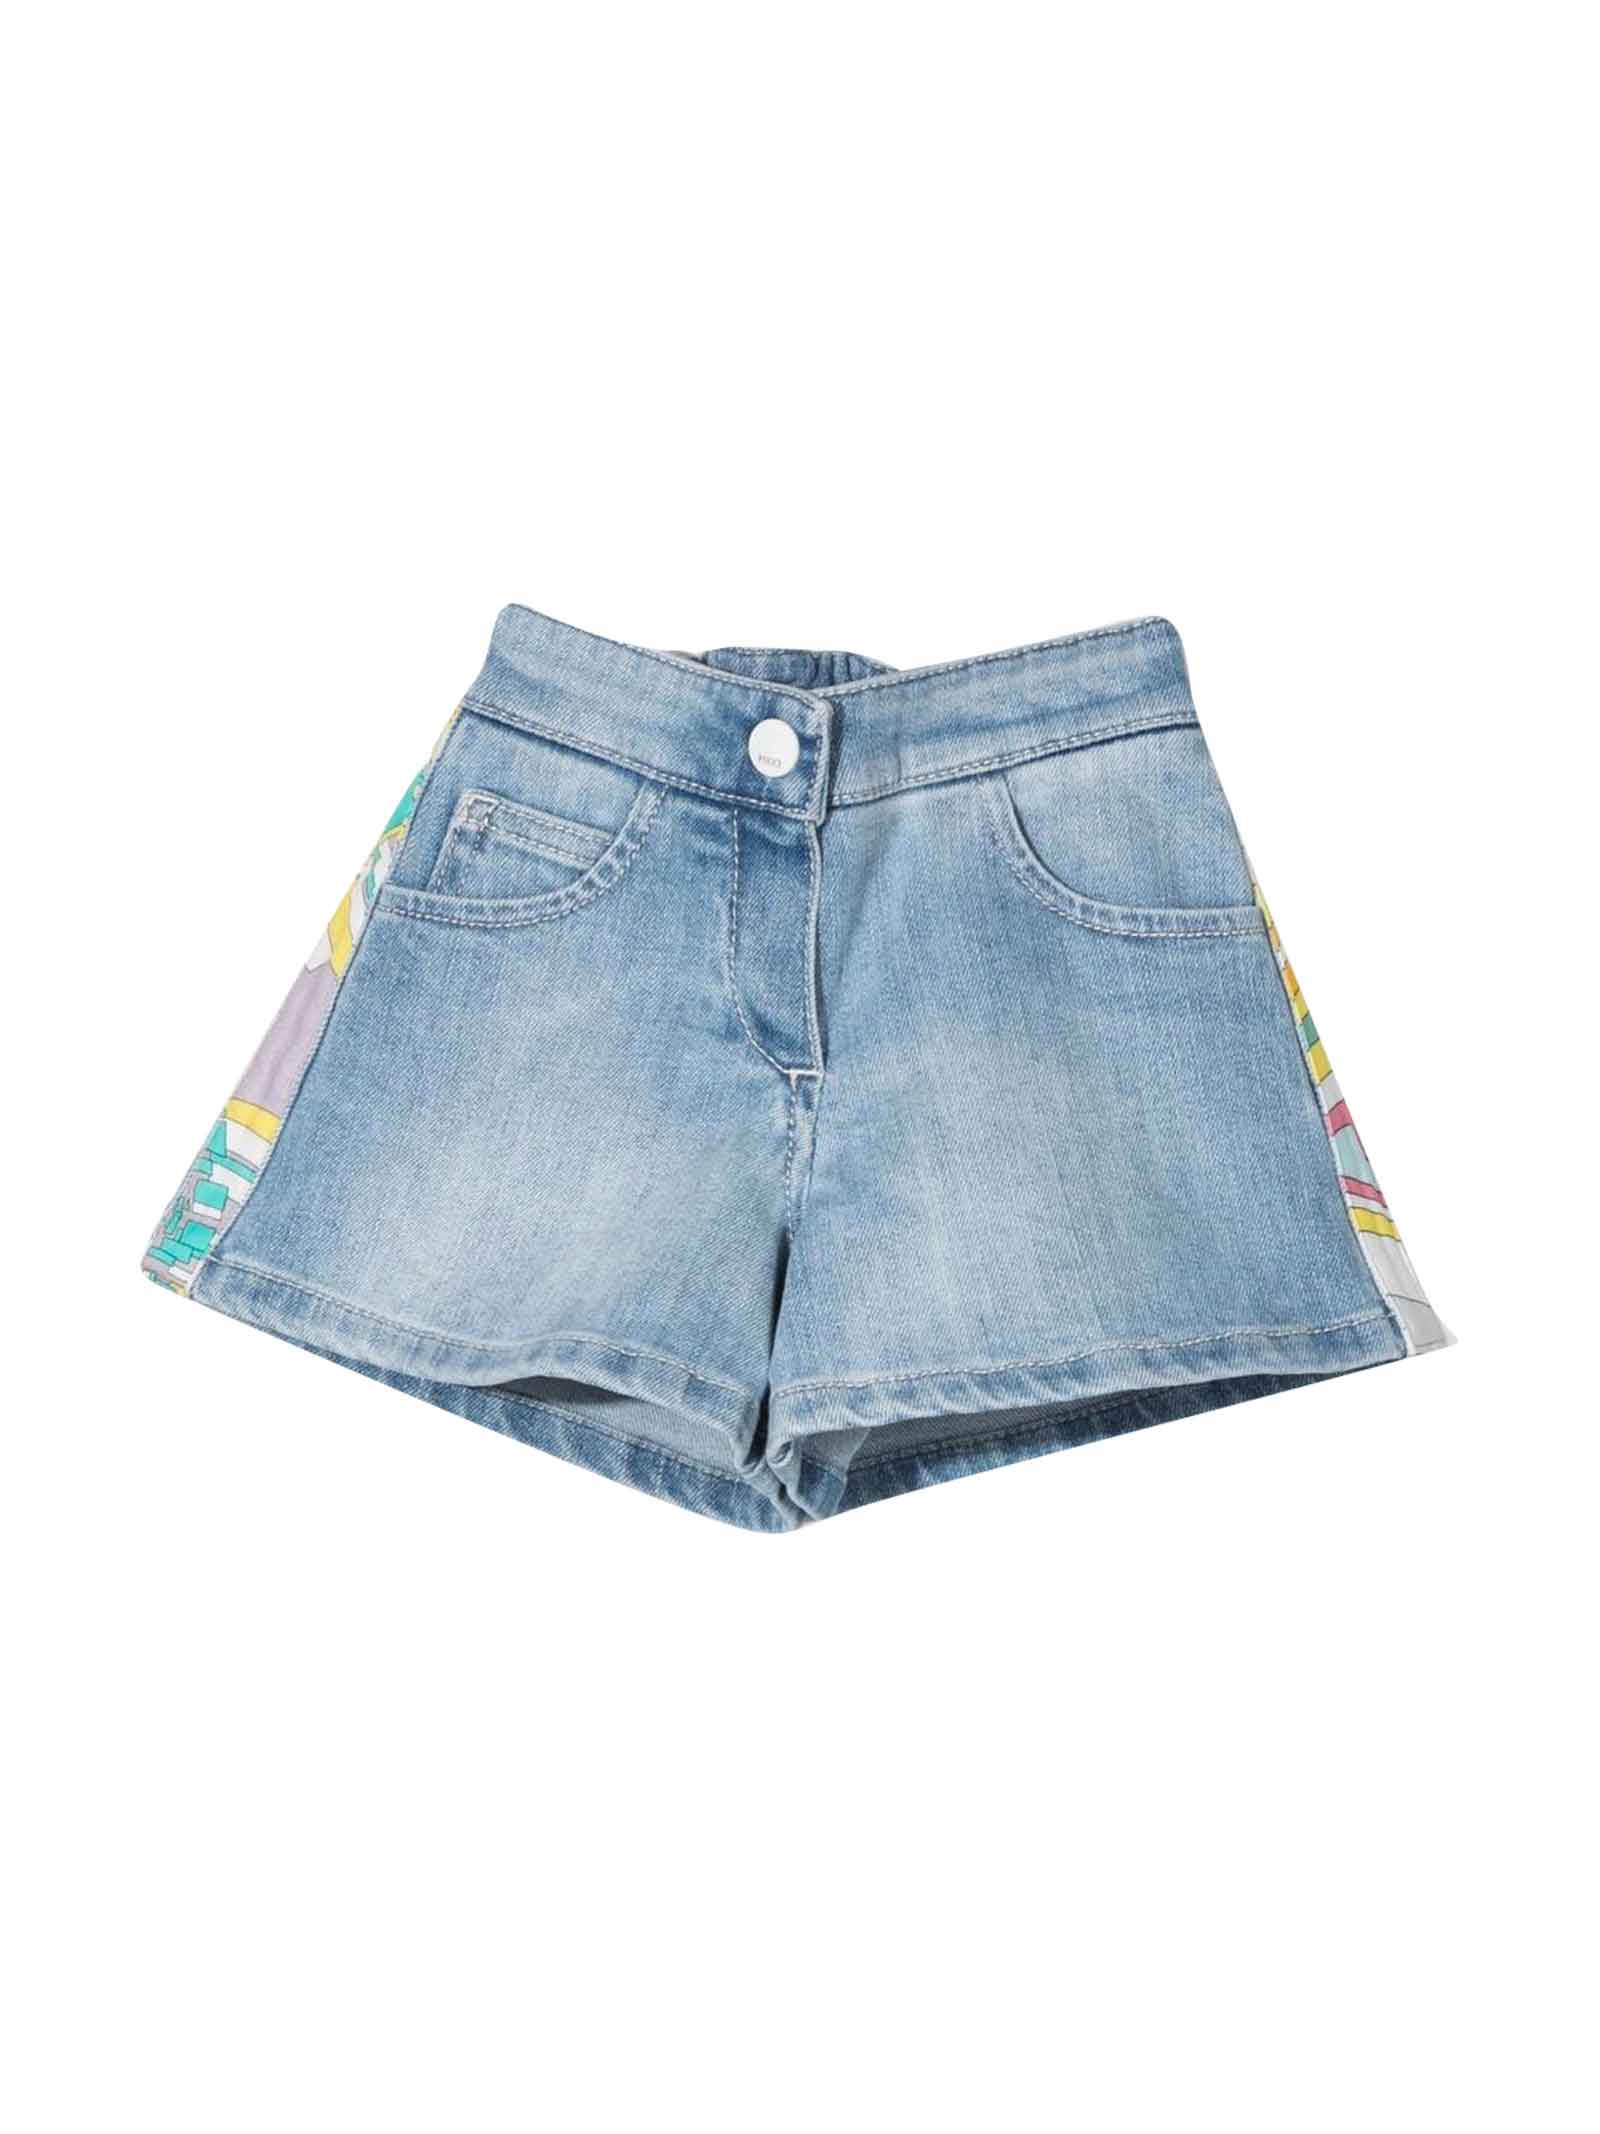 Emilio Pucci Girl Denim Shorts Elasticated Waist, Button And Zip Front Closure, Classic Five Pocket Design And Paneled Design.